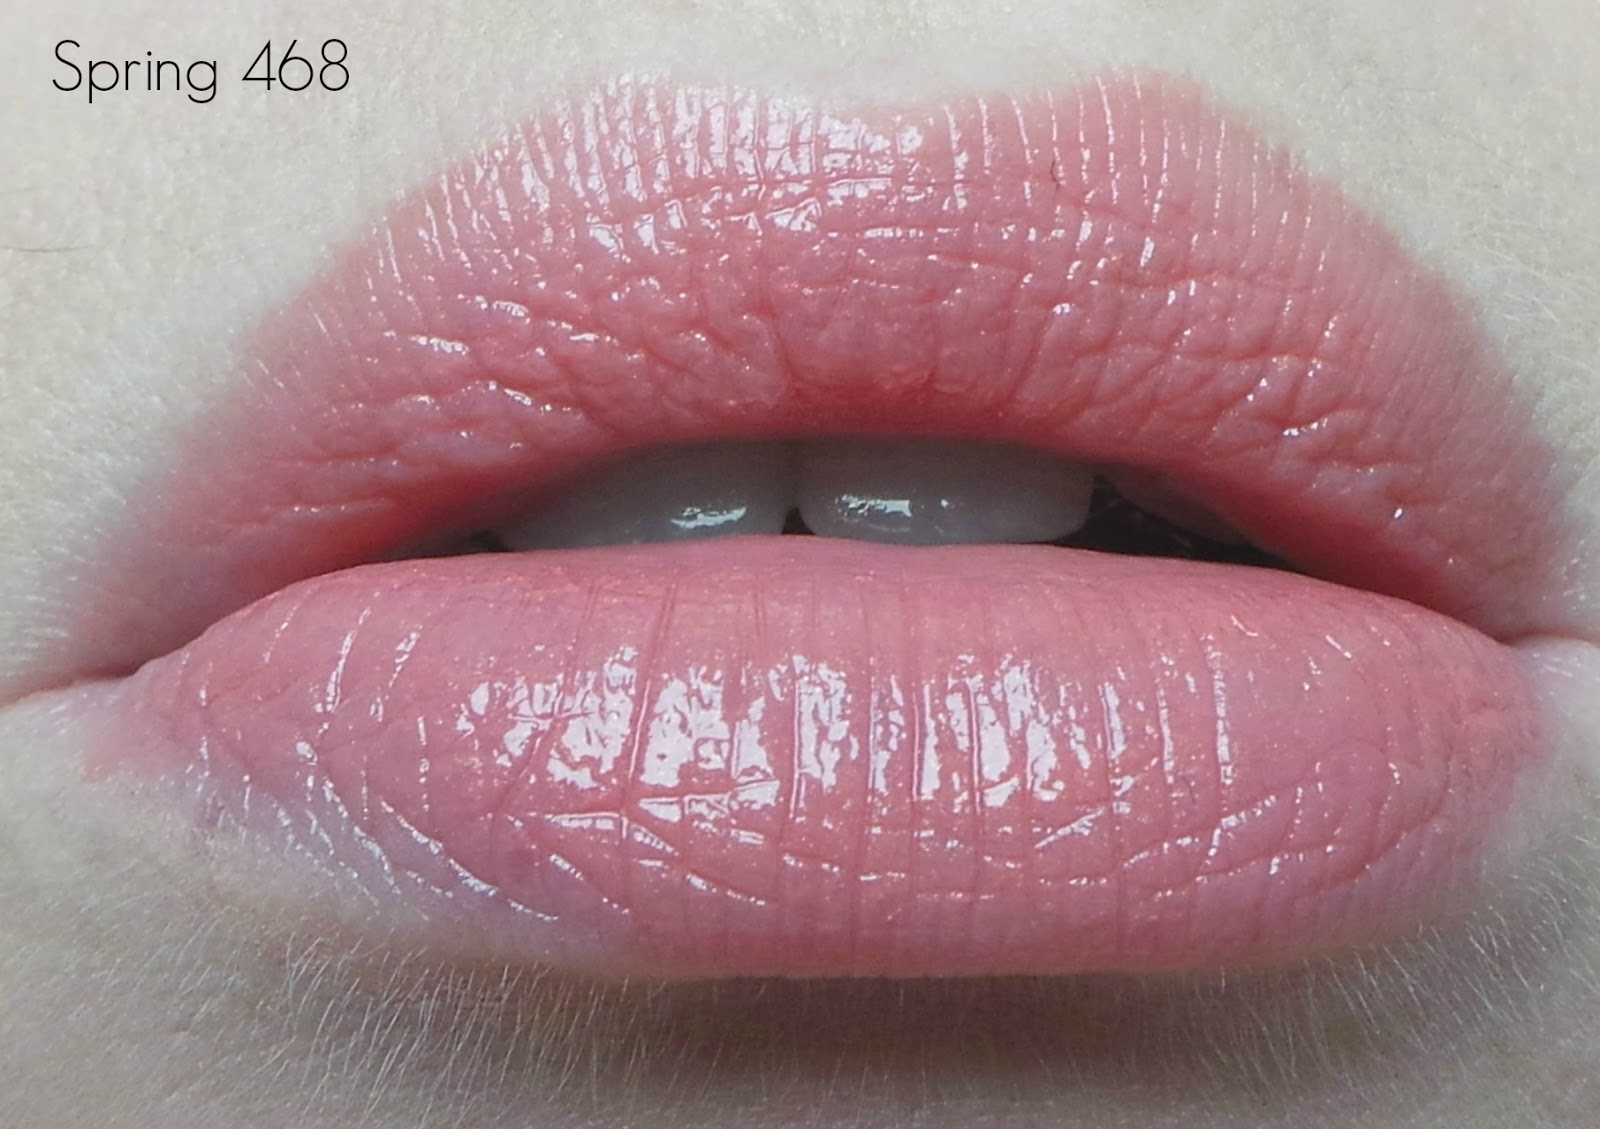 Christian Dior Rouge Dior Baume review